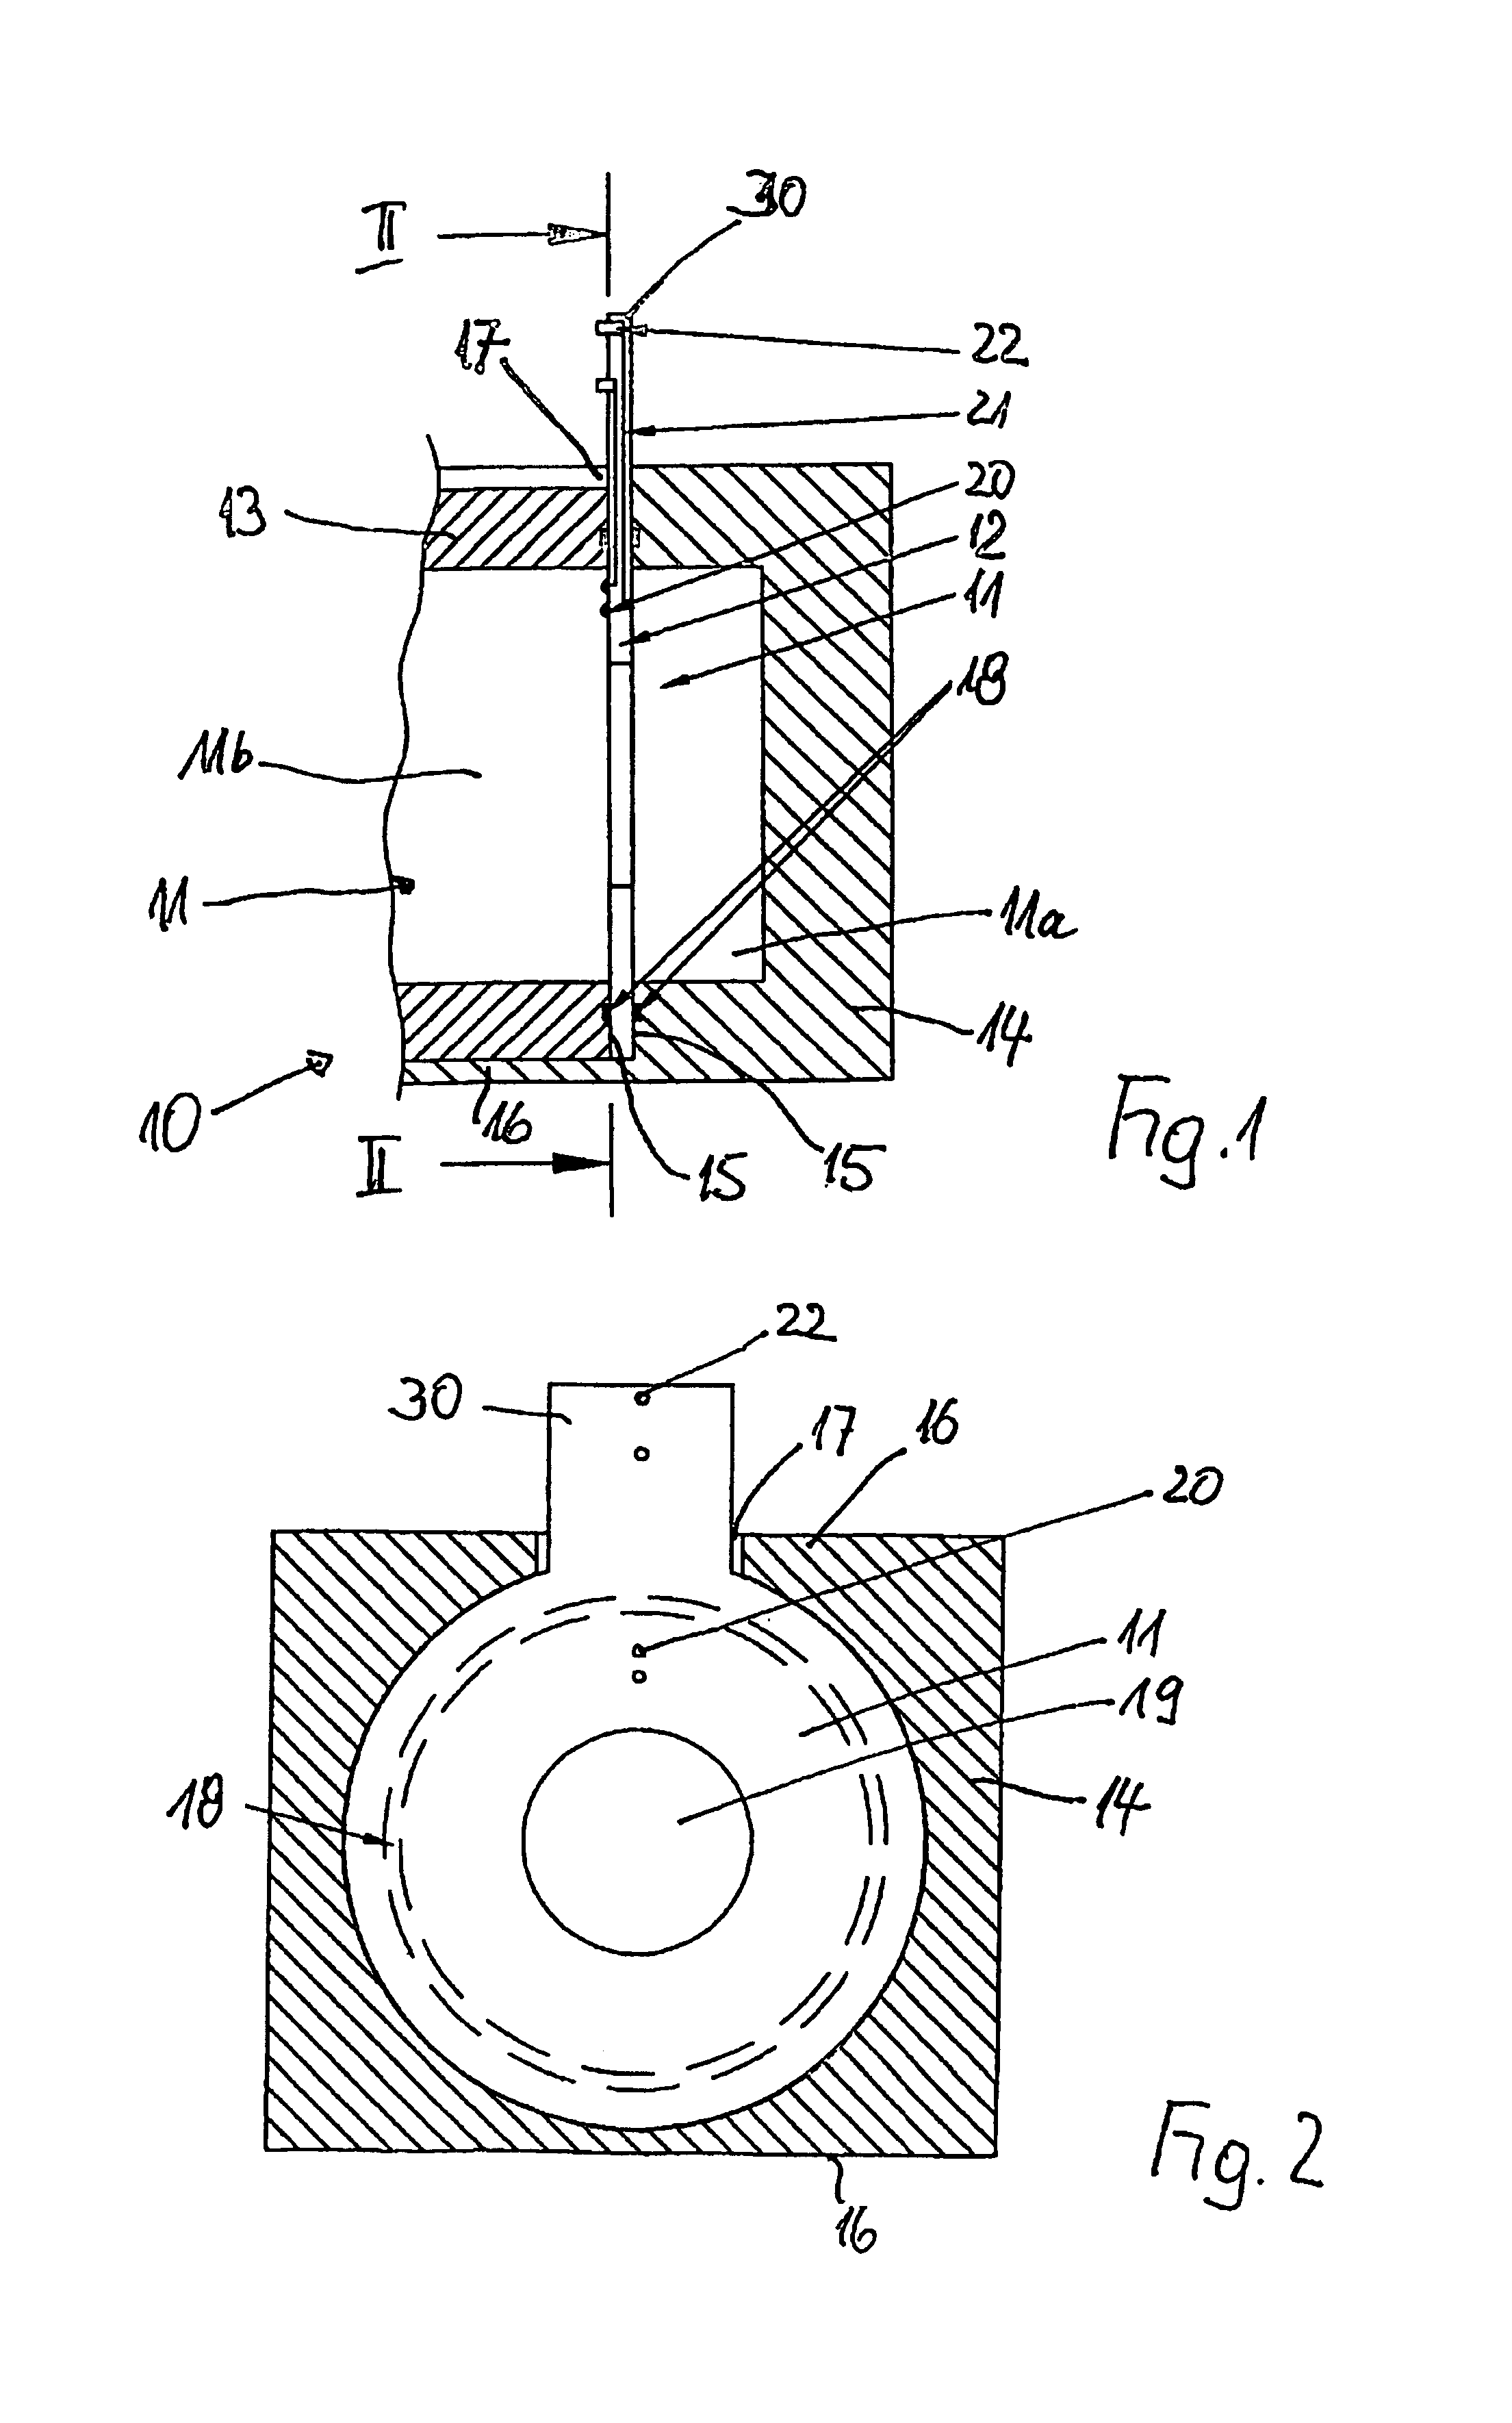 System for detecting and transmitting test data from a pressure chamber filled with a high-pressure fluid